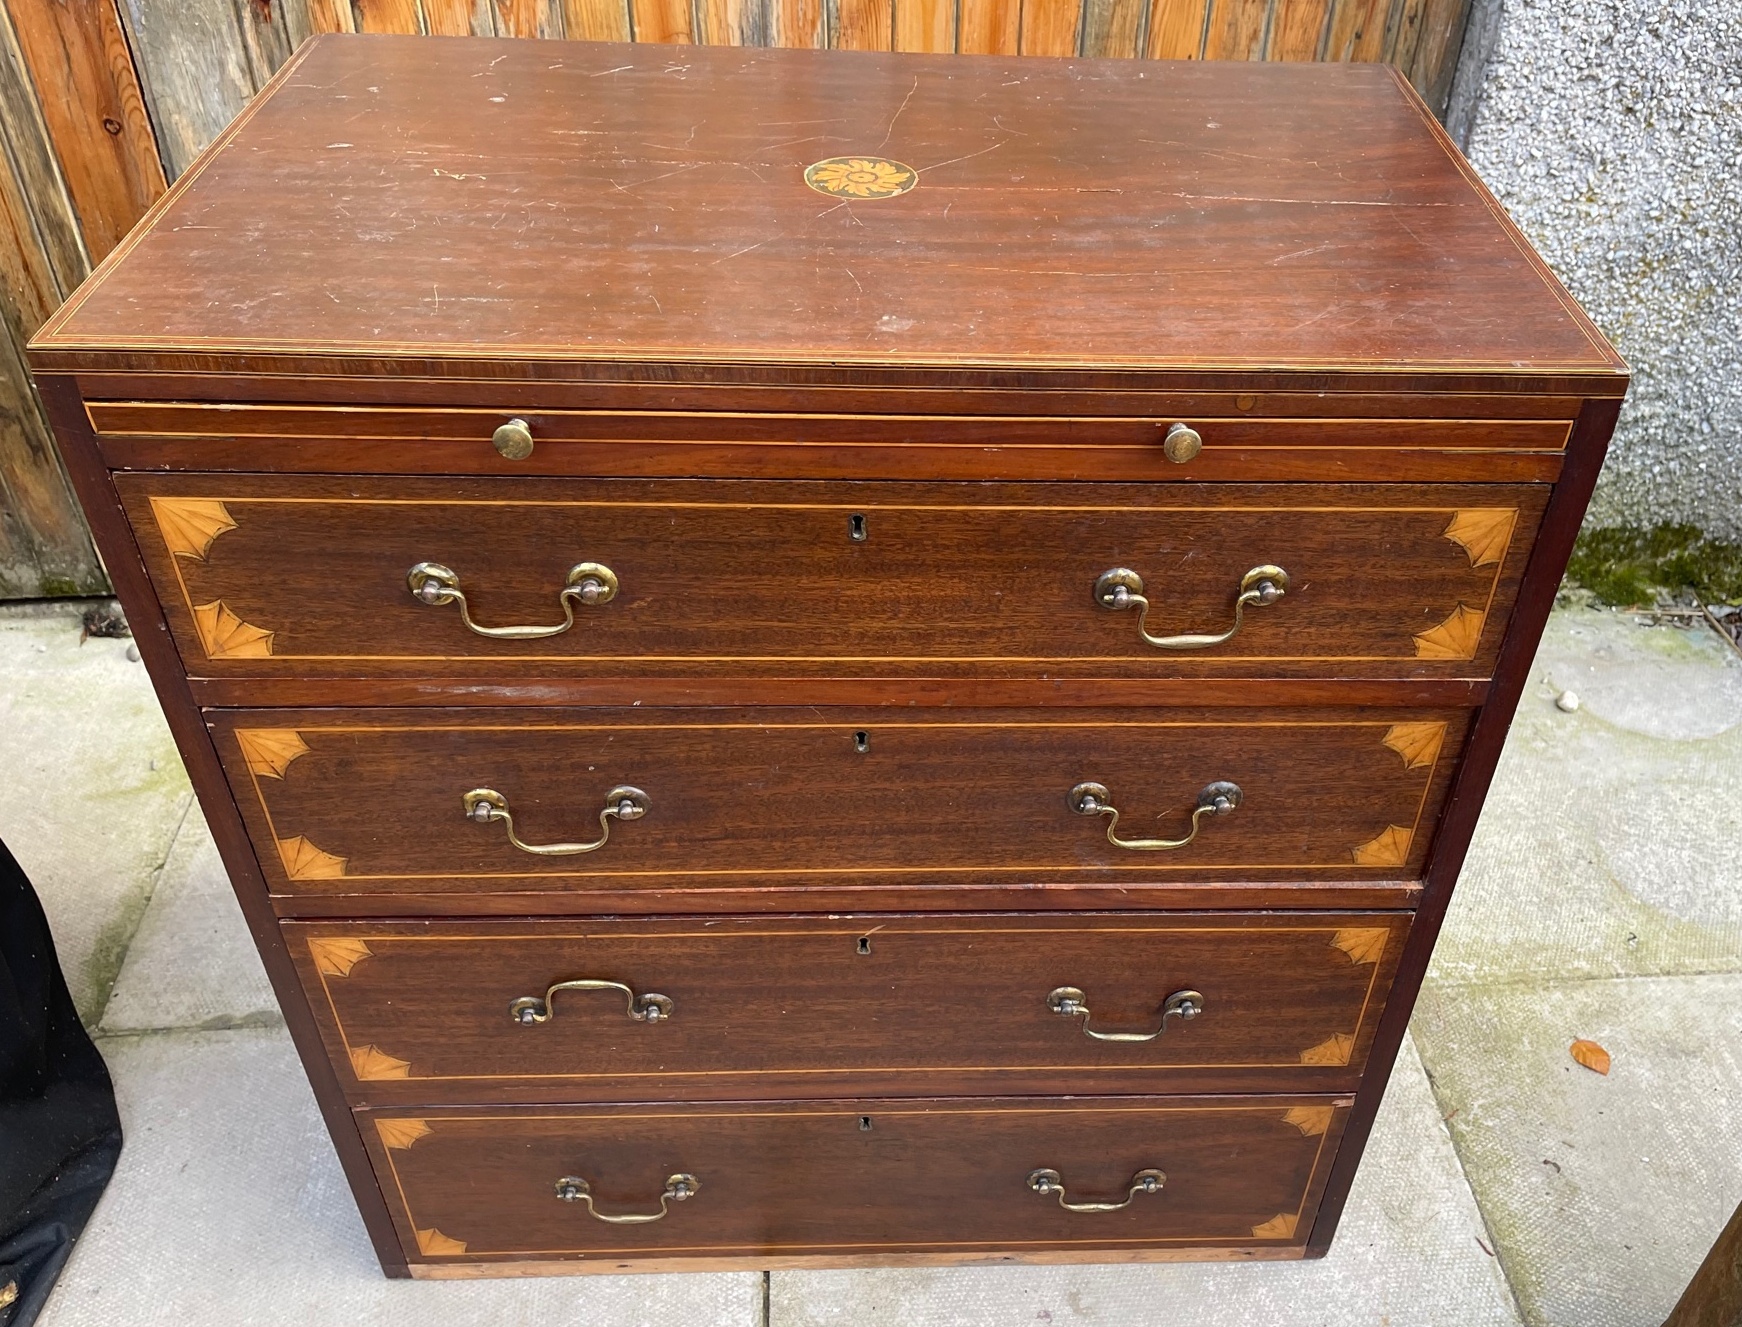 Antique Inlaid Chest of Drawers with Slide - 31" x 29 1/2" x 18 1/4". - Image 5 of 6